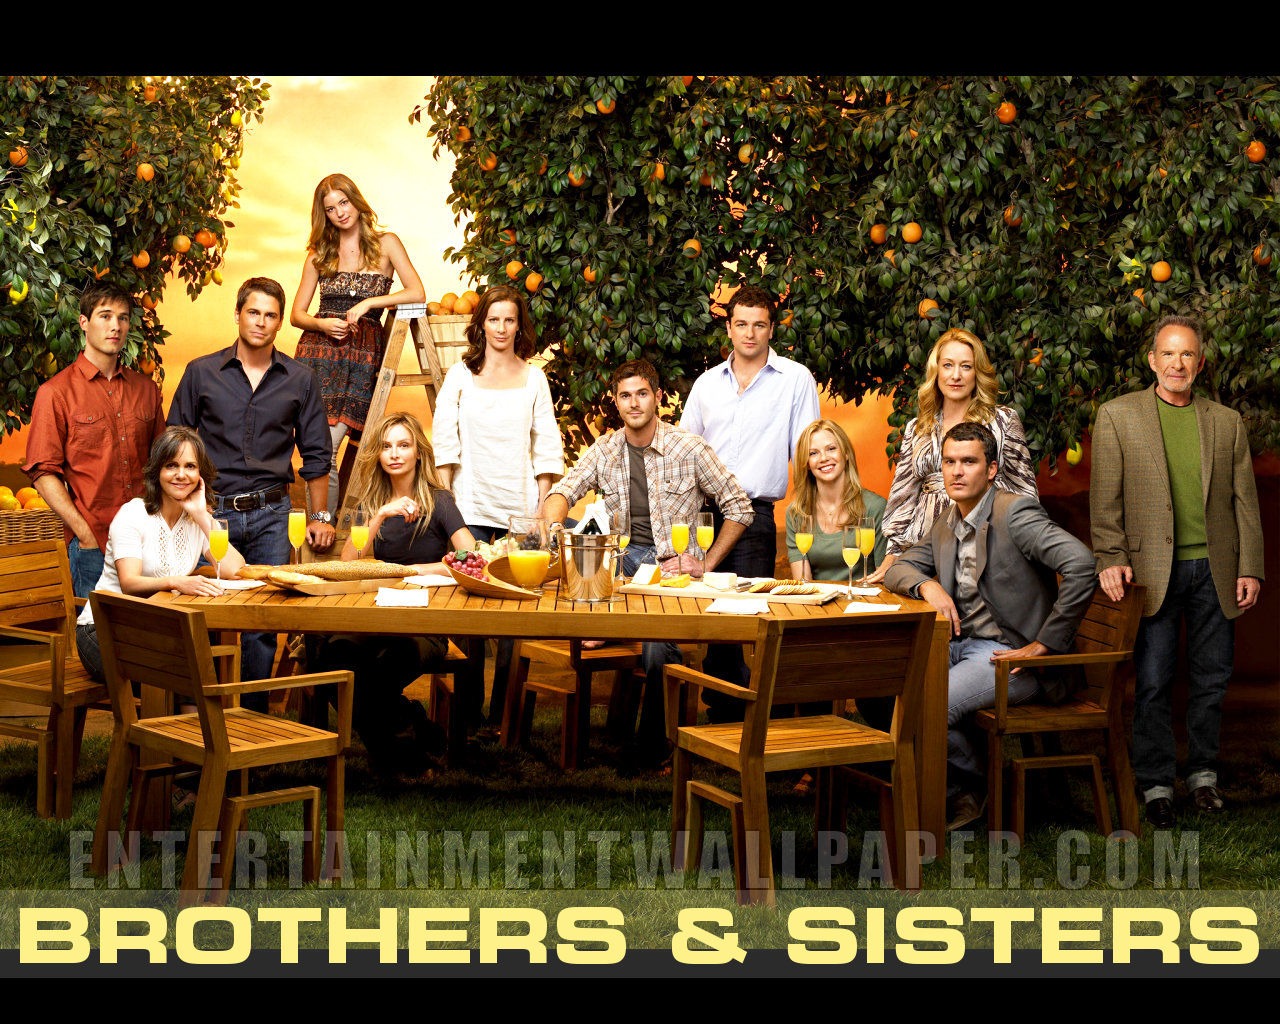 Brothers & Sisters 兄弟姐妹 #28 - 1280x1024